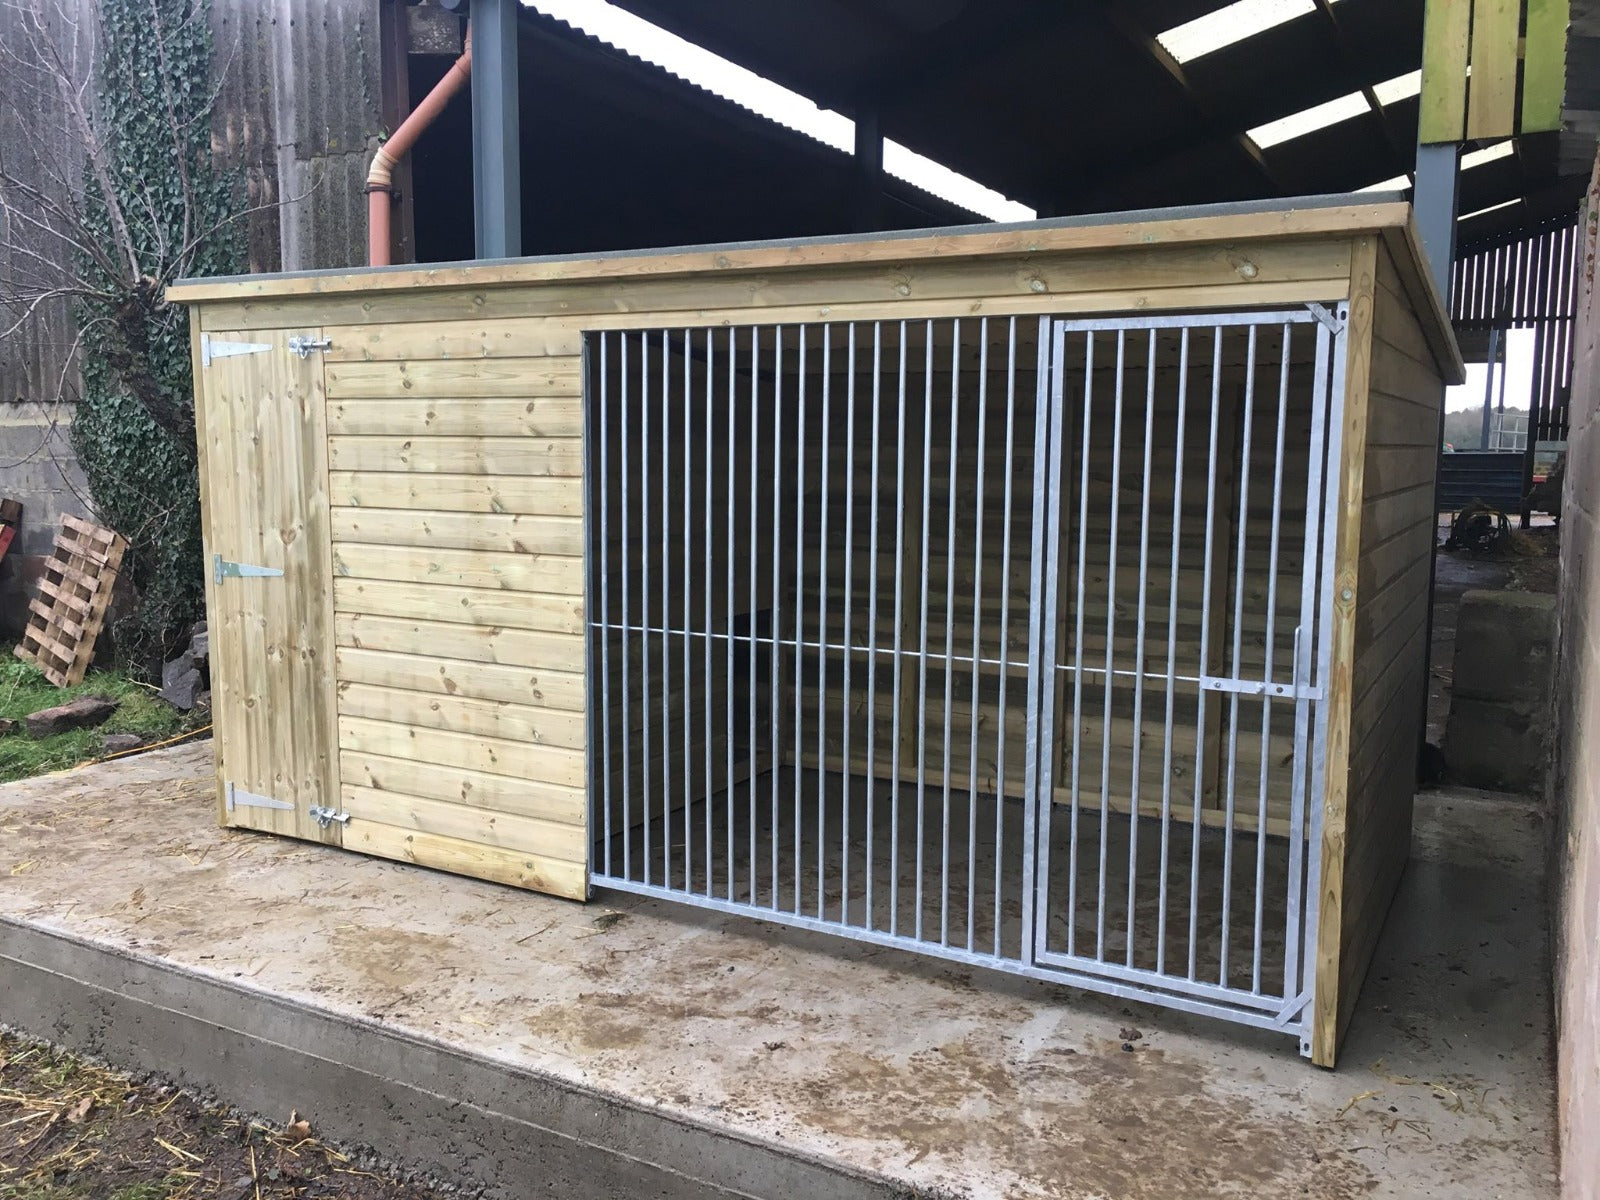 Chesterfield Wooden Dog Kennel And Run 14ft (wide) x 6ft (depth) x 5'11ft (high)